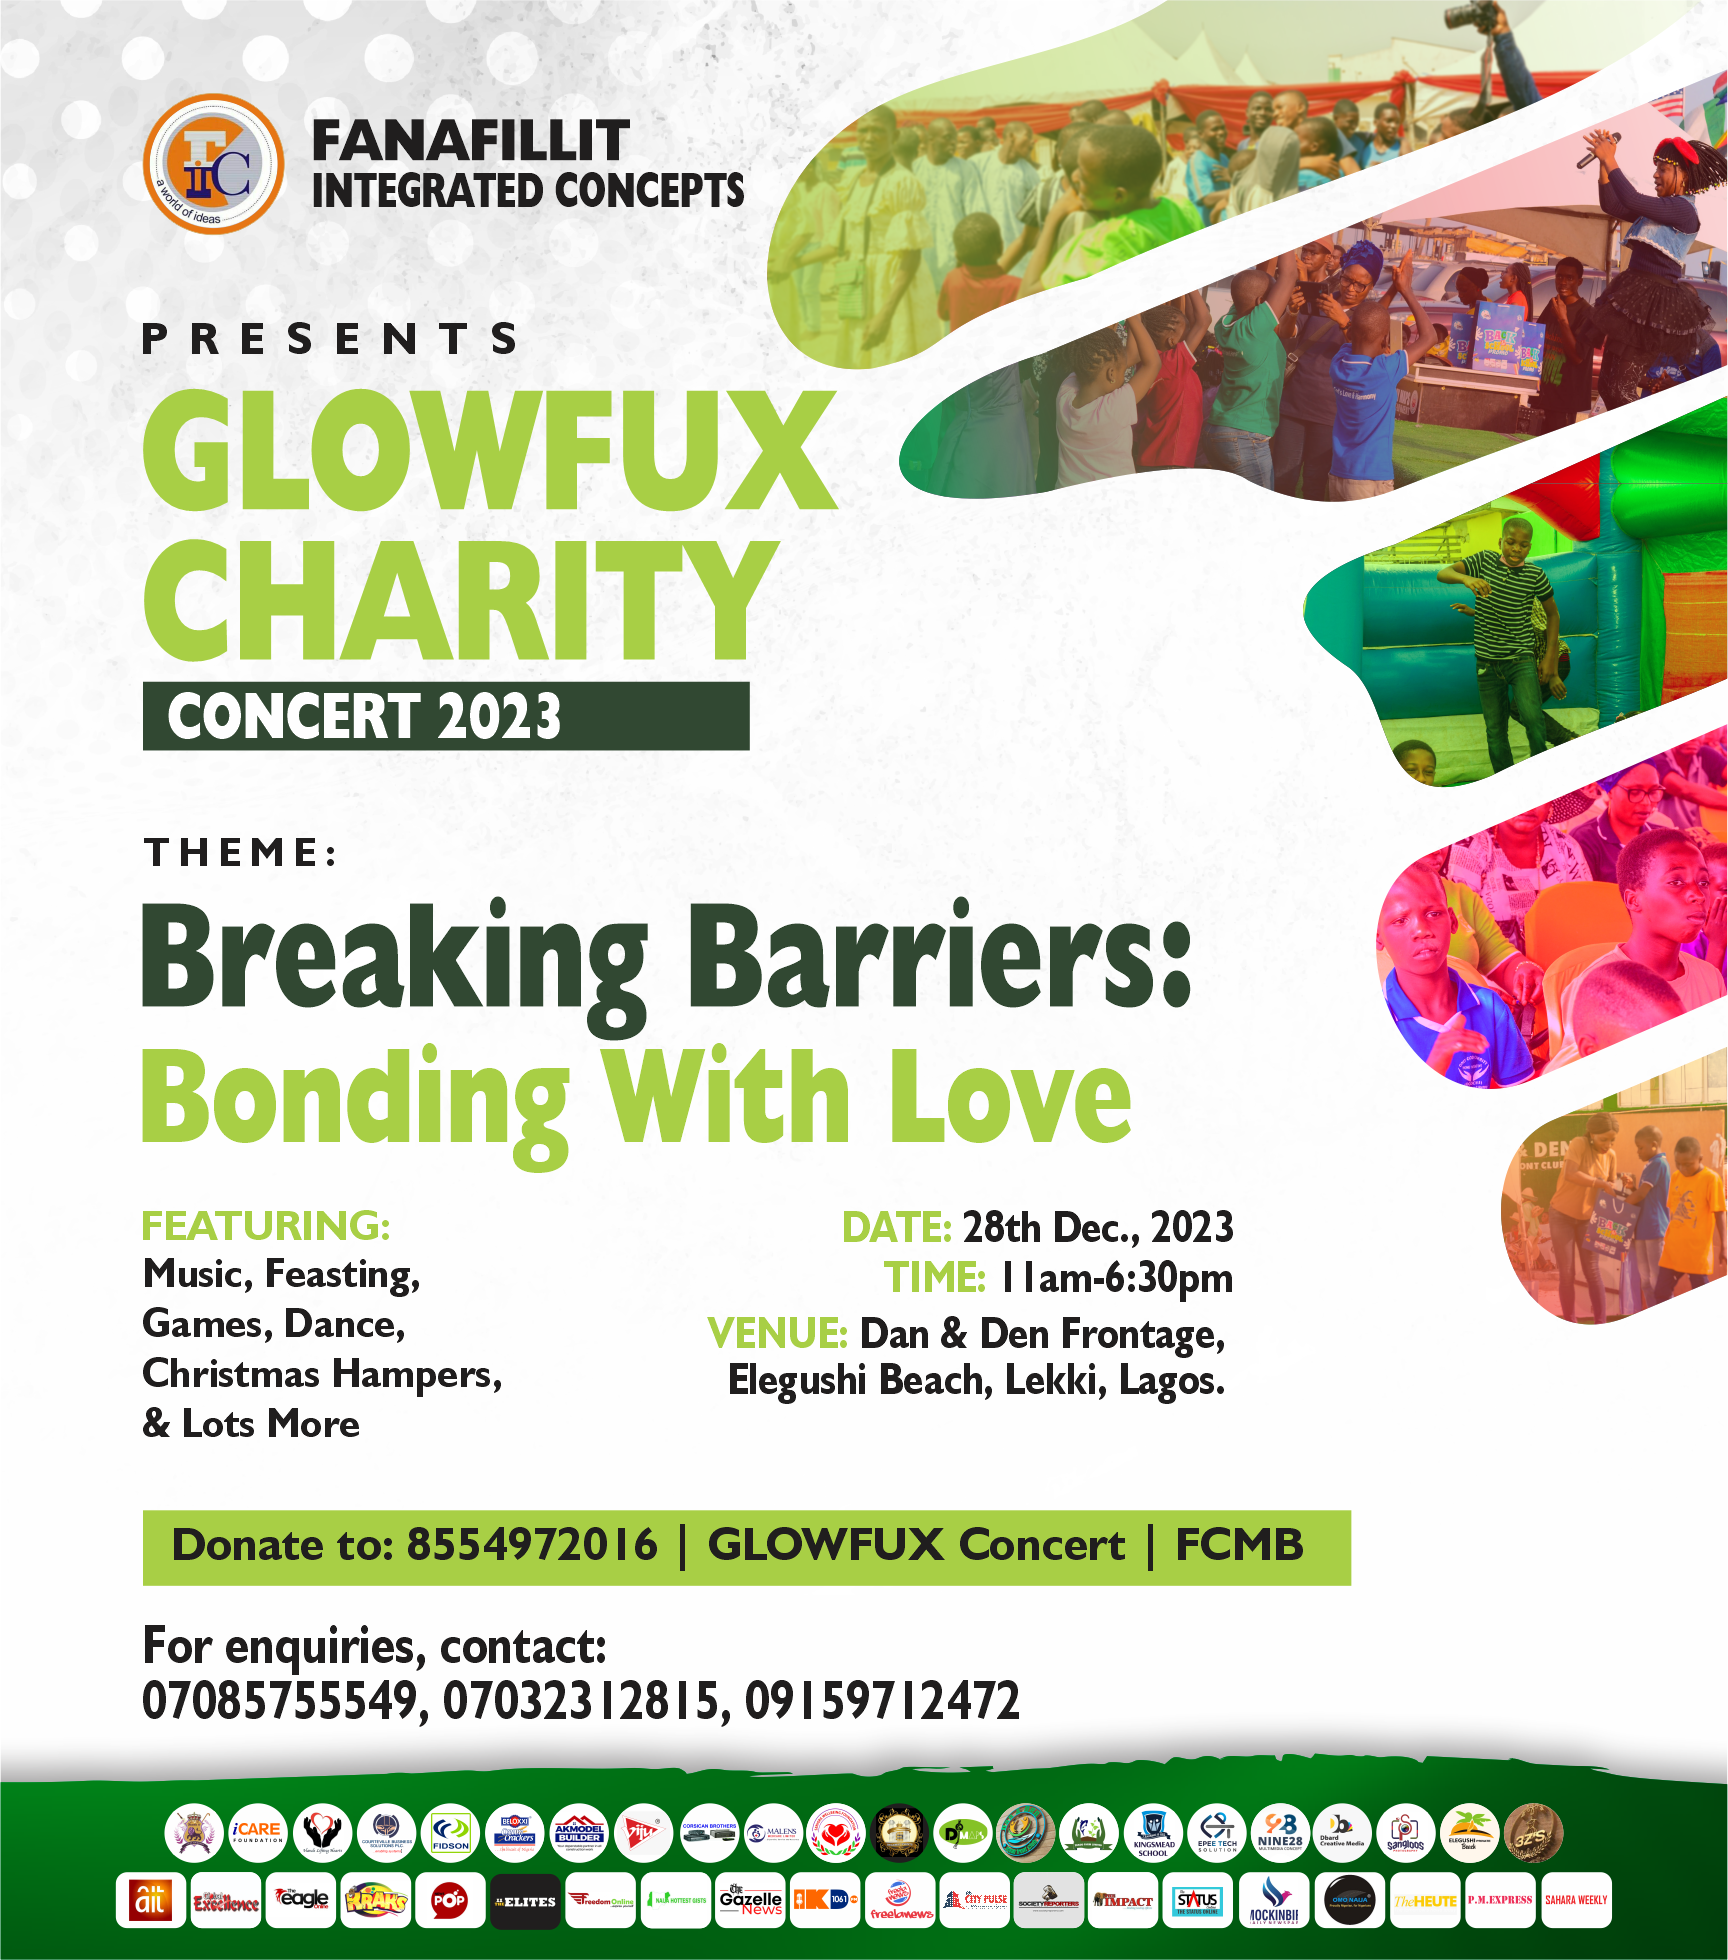 GLOWFUX '23: FANAFILLIT Embarks on a Mission to Break Barriers and Foster Love